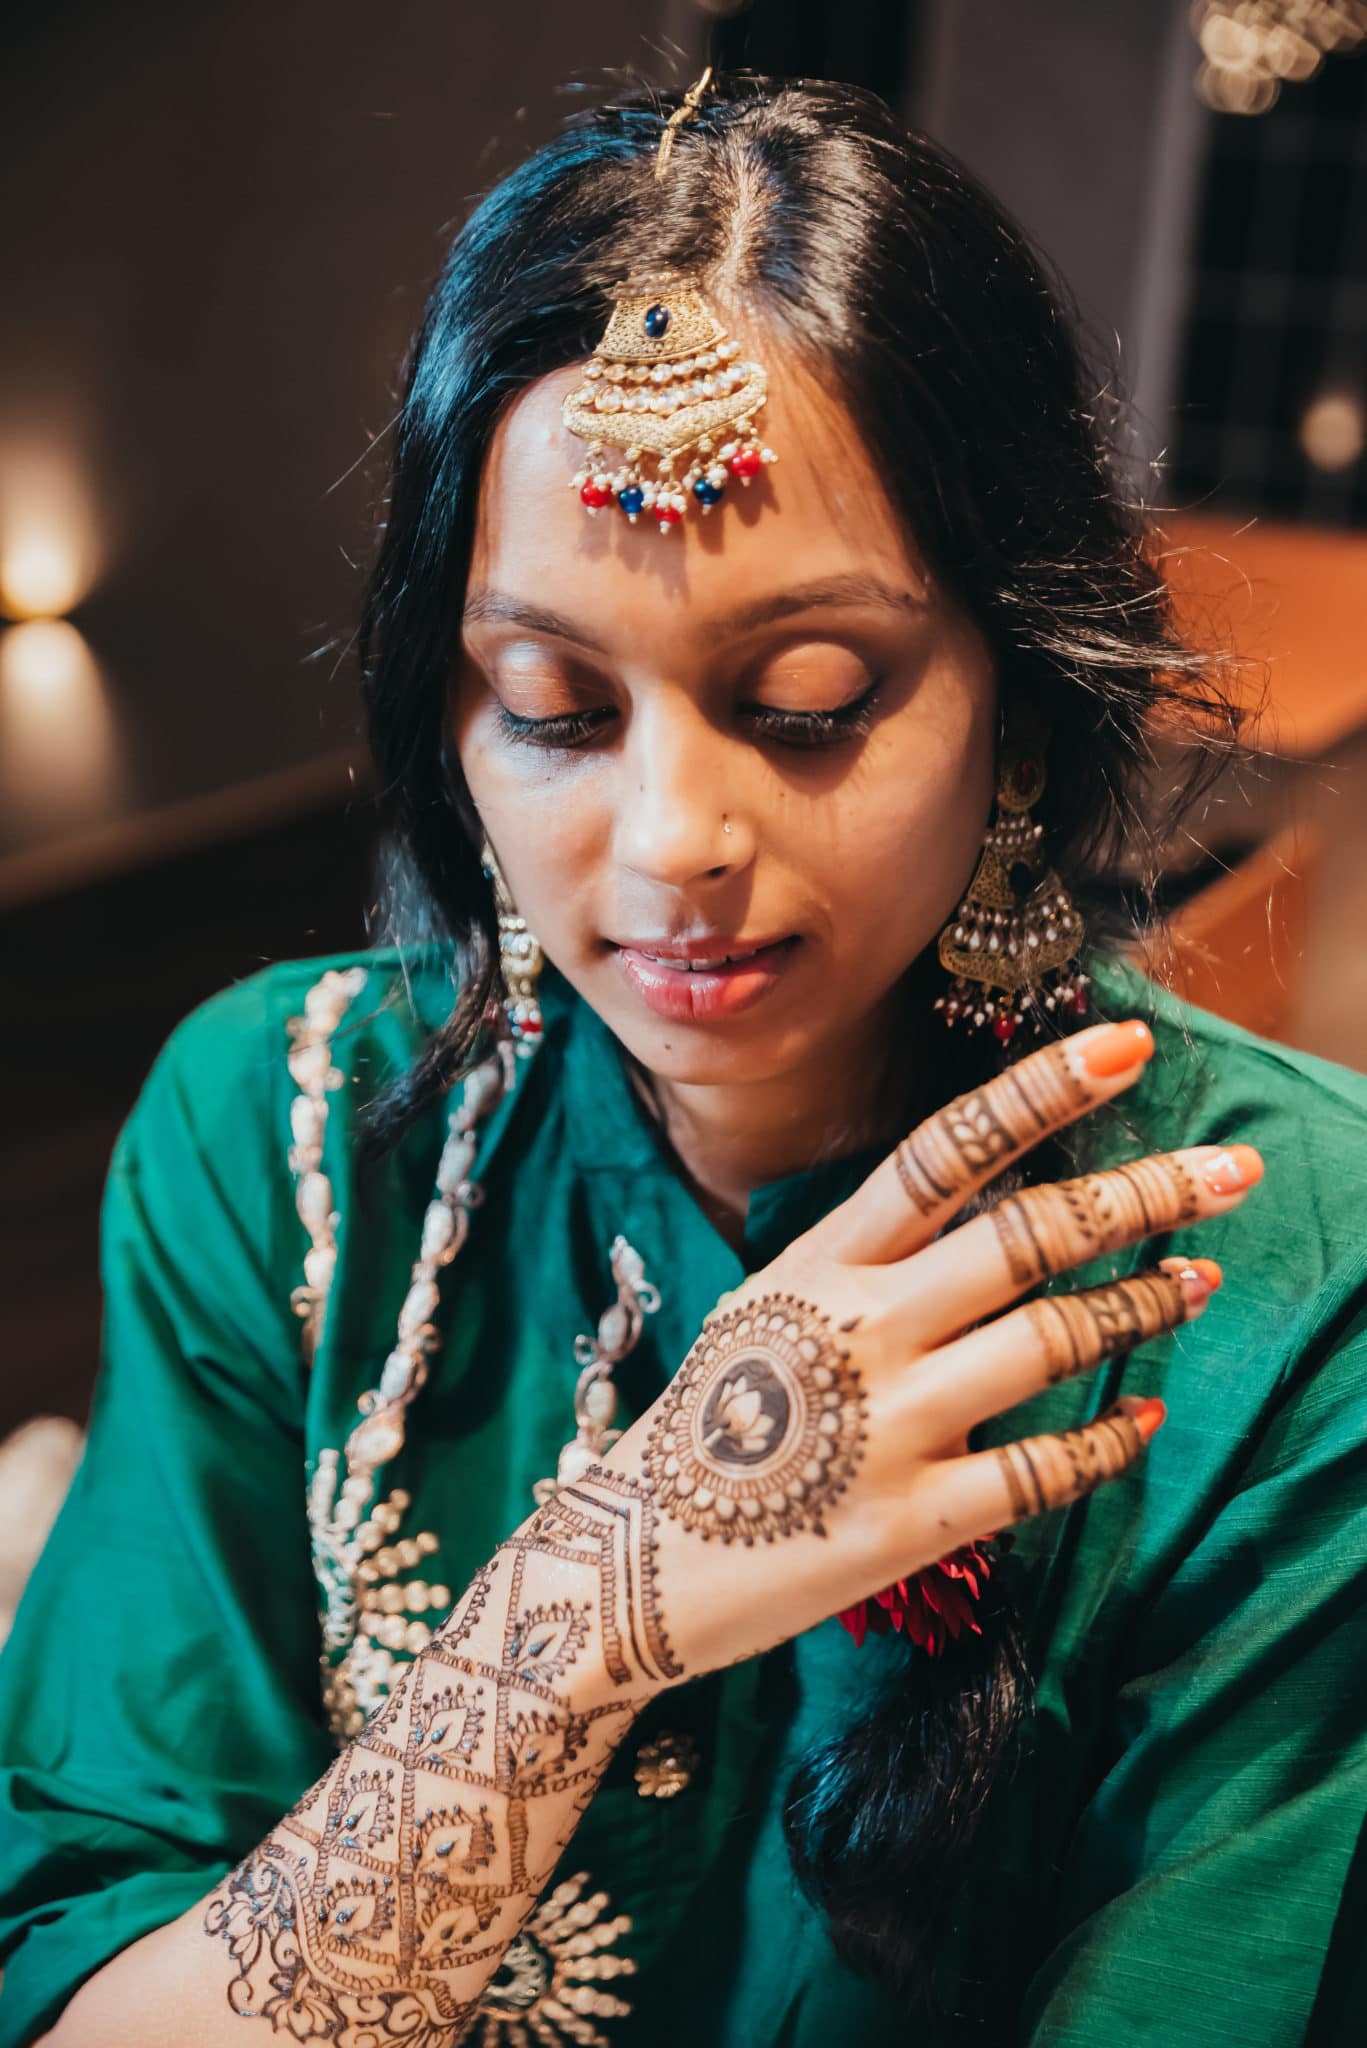 Mehndi ceremony in an Indian wedding ceremony , Barnet, Potters Bar